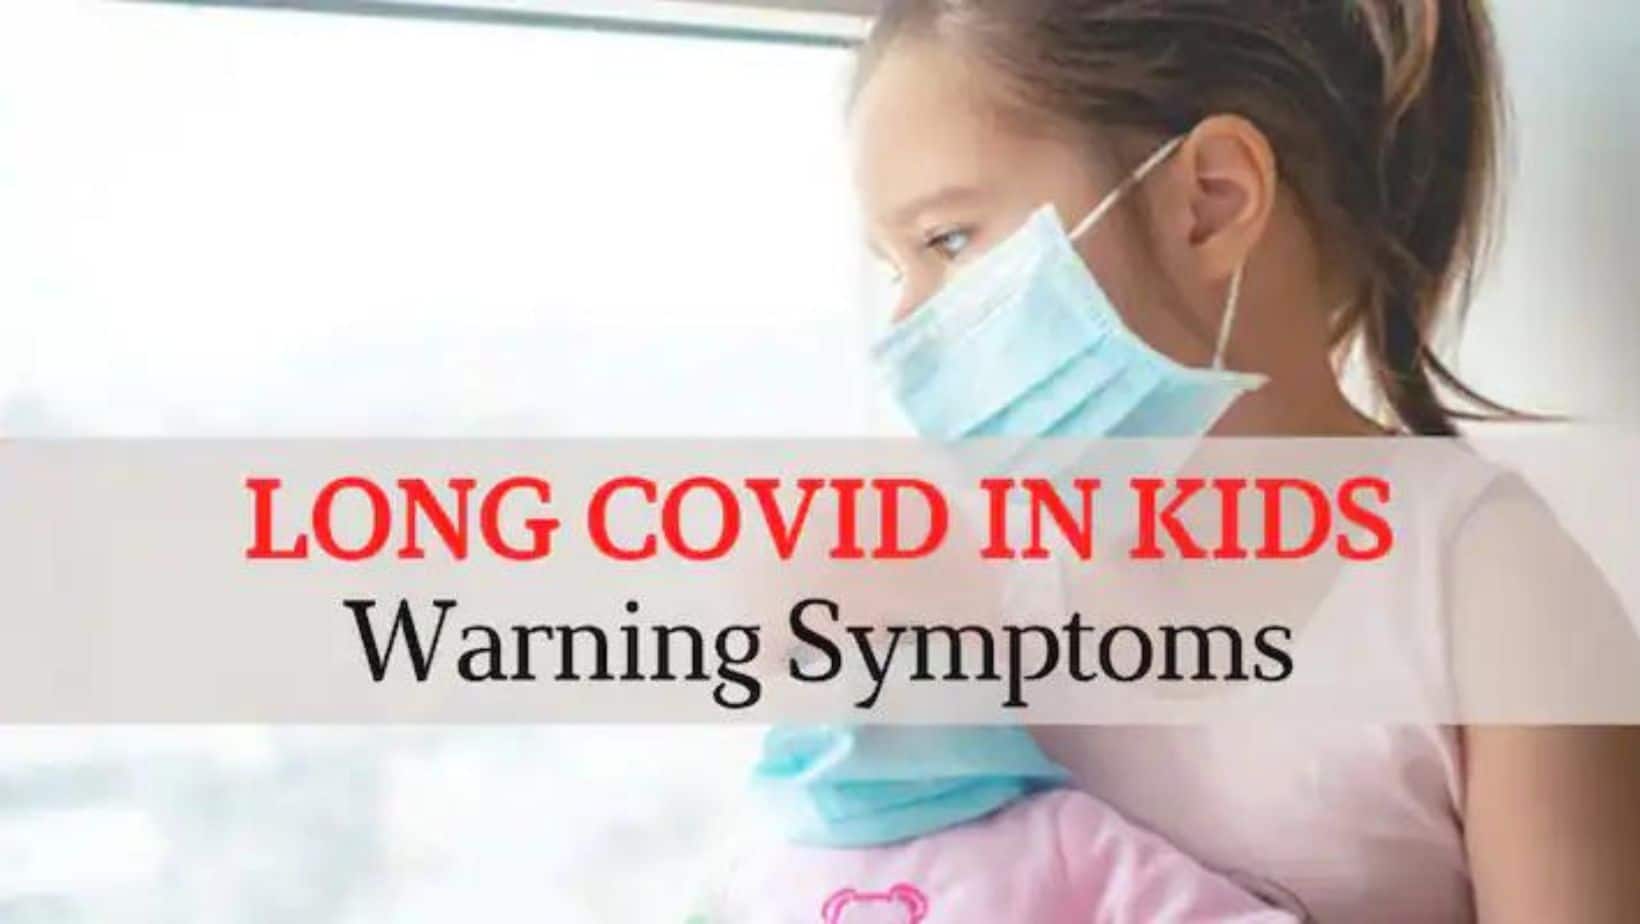 Long-COVID In Children Can Last For Over 60 Days: Experts Warn of Unusual Symptoms